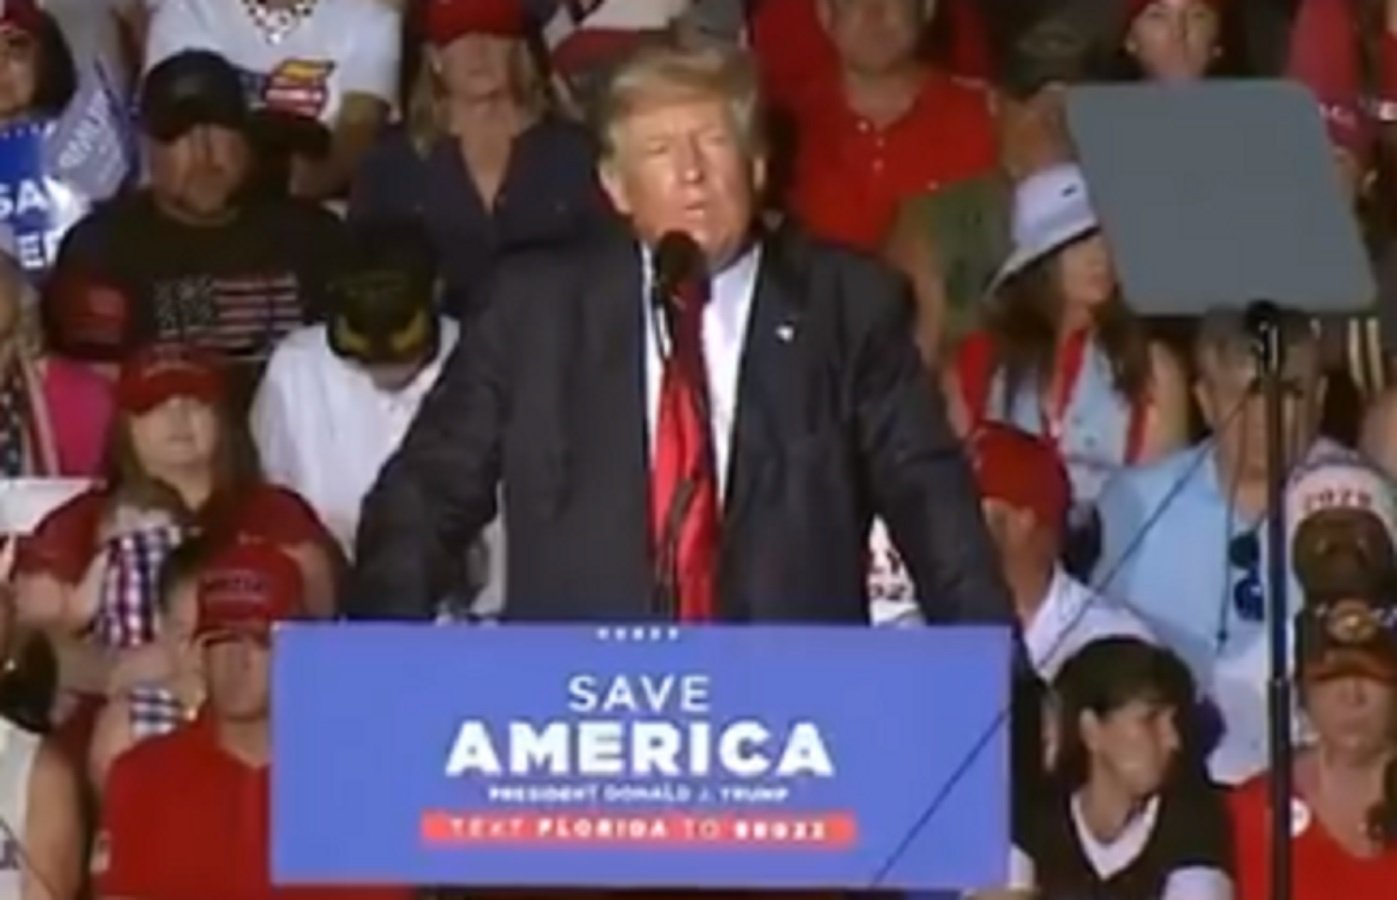  WATCH: Trump Asks Who Killed Ashli Babbitt at Rally, Demands to Know Why Jan. 6 Protesters Are Still Jailed